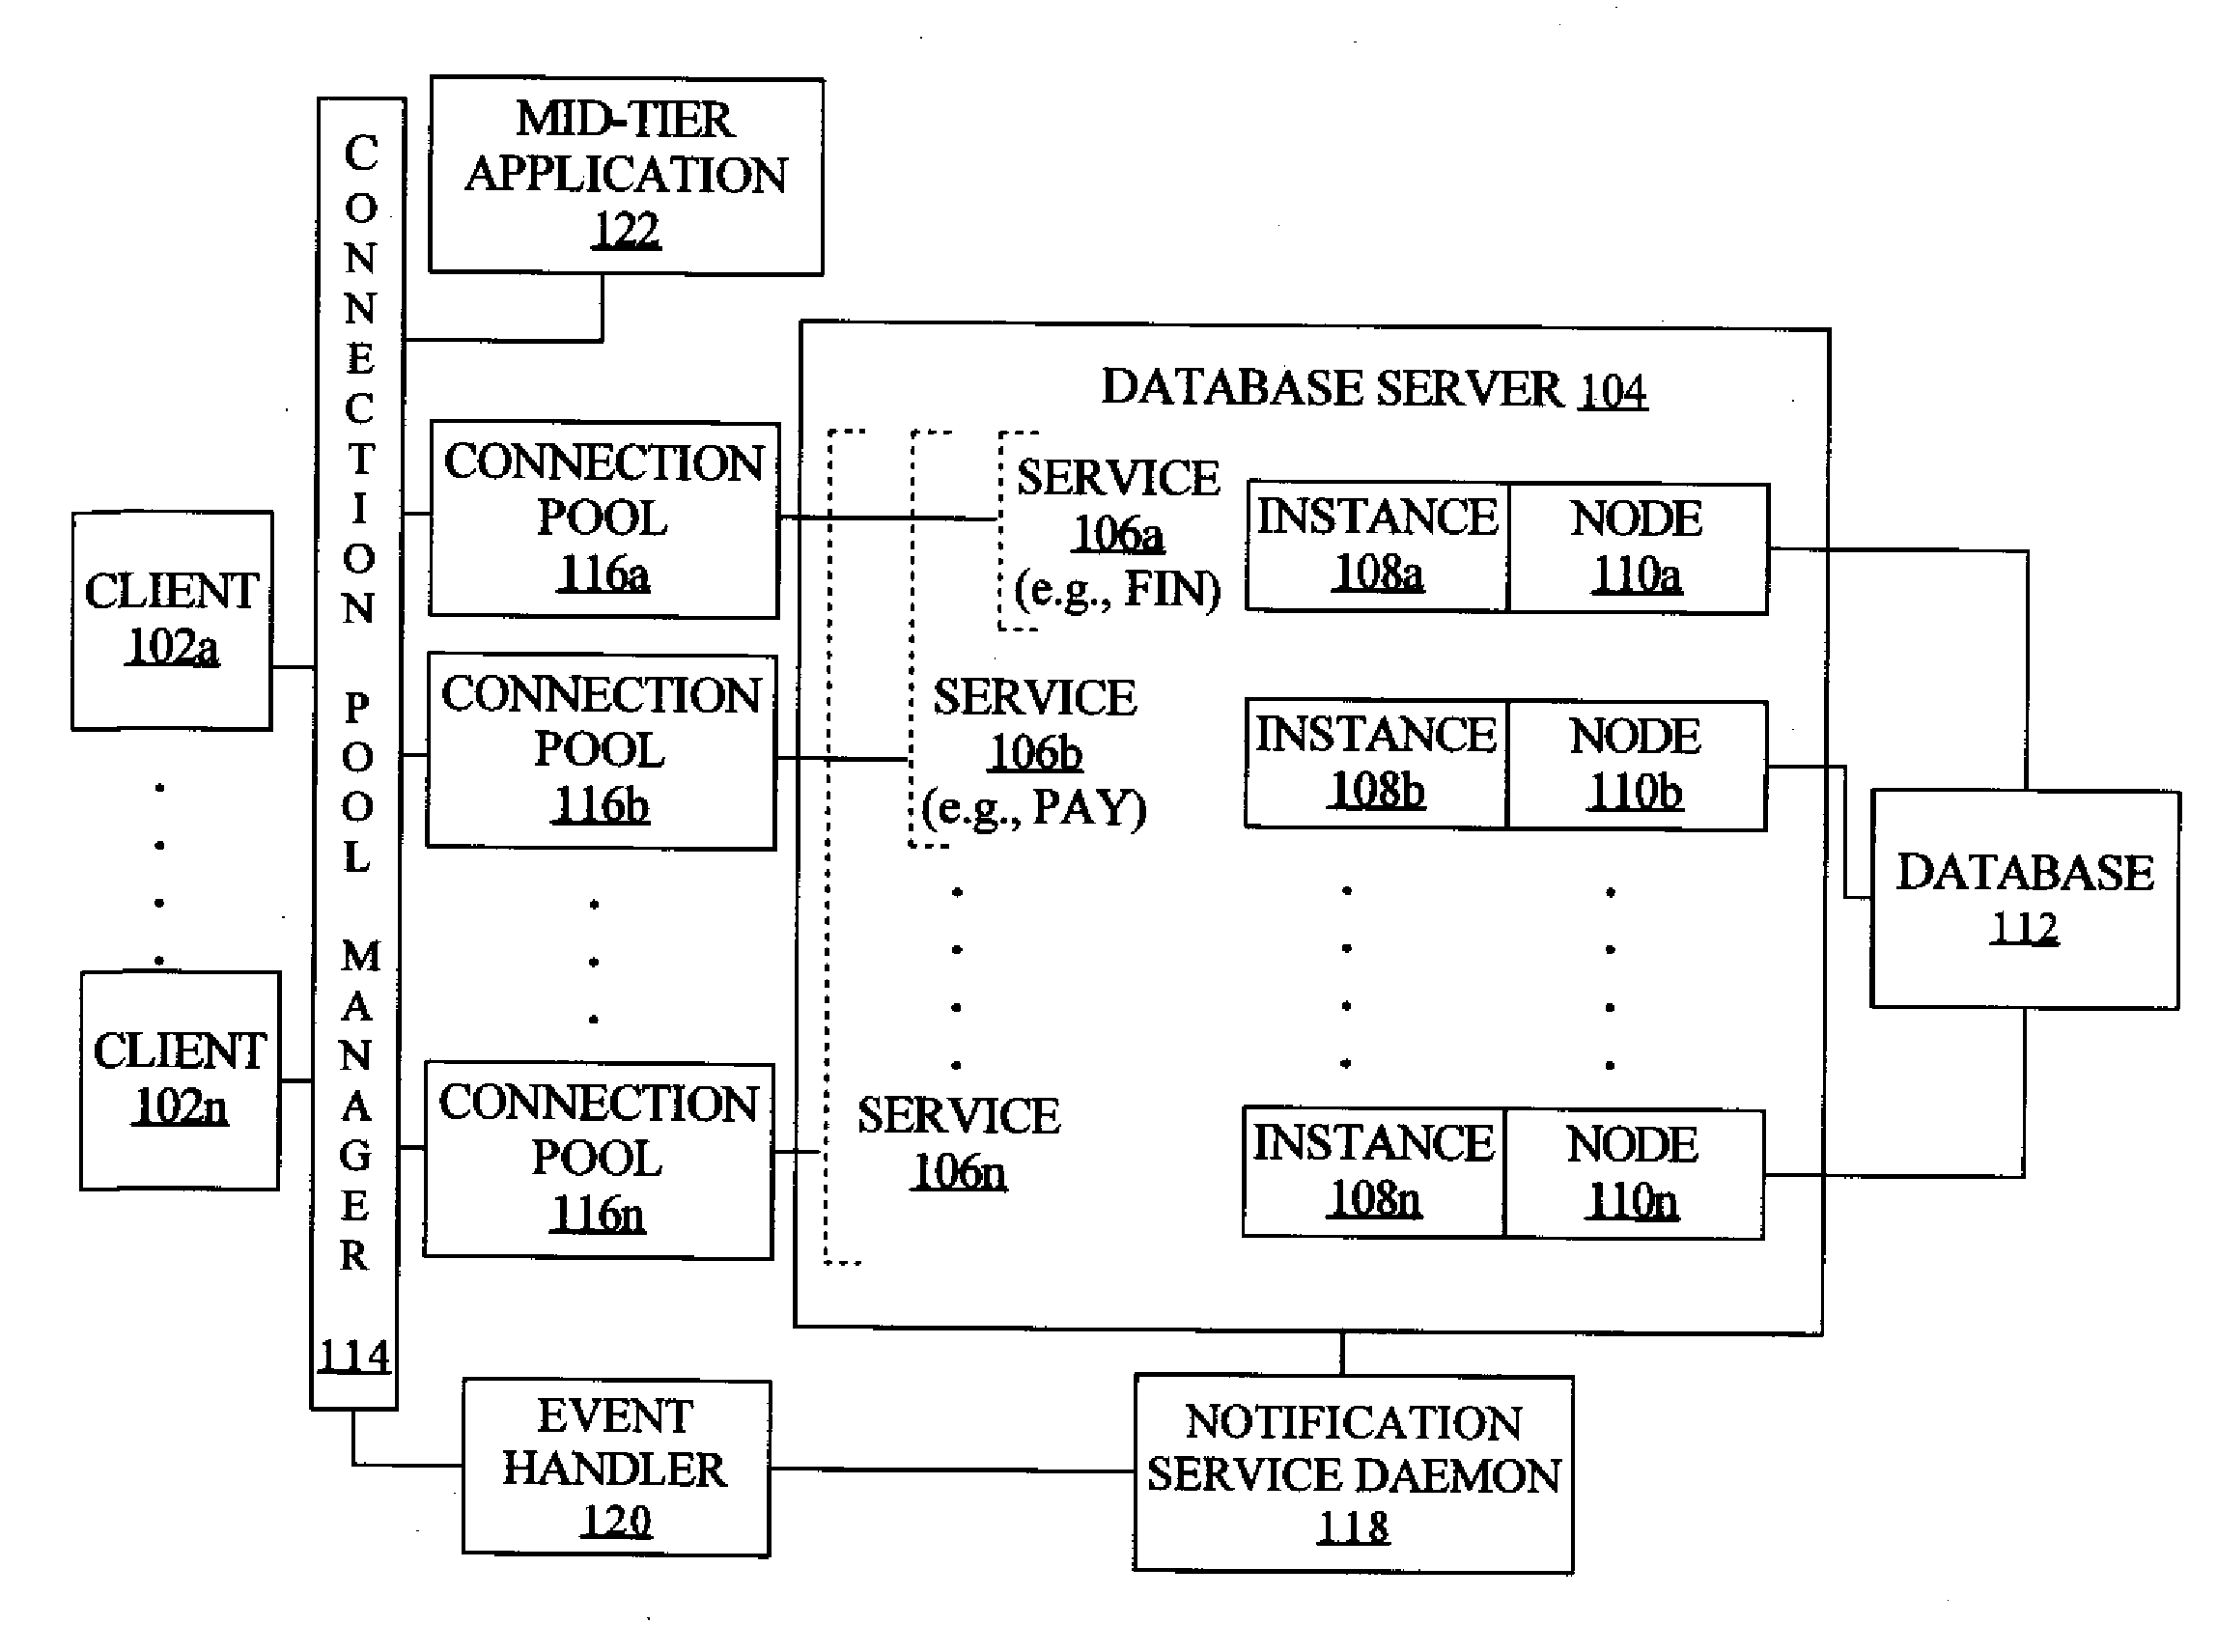 Connection Pool Use of Runtime Load Balancing Service Performance Advisories